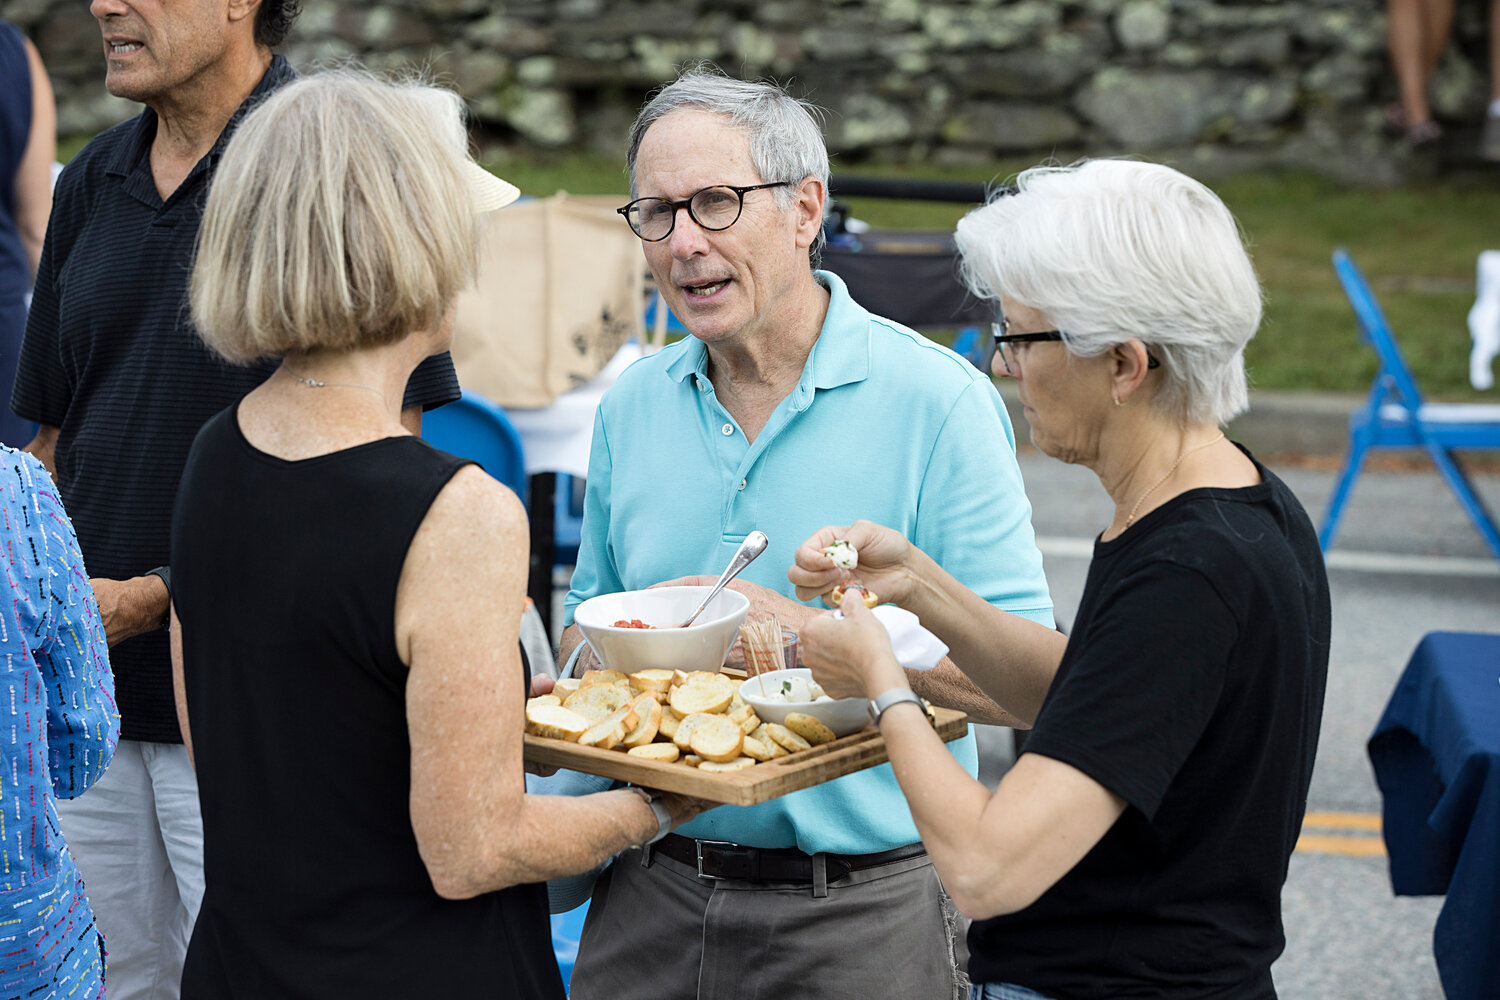 Friends share appetizers while waiting for the dinner bell to ring at Sunday's community dinner on the Commons in Little Compton.